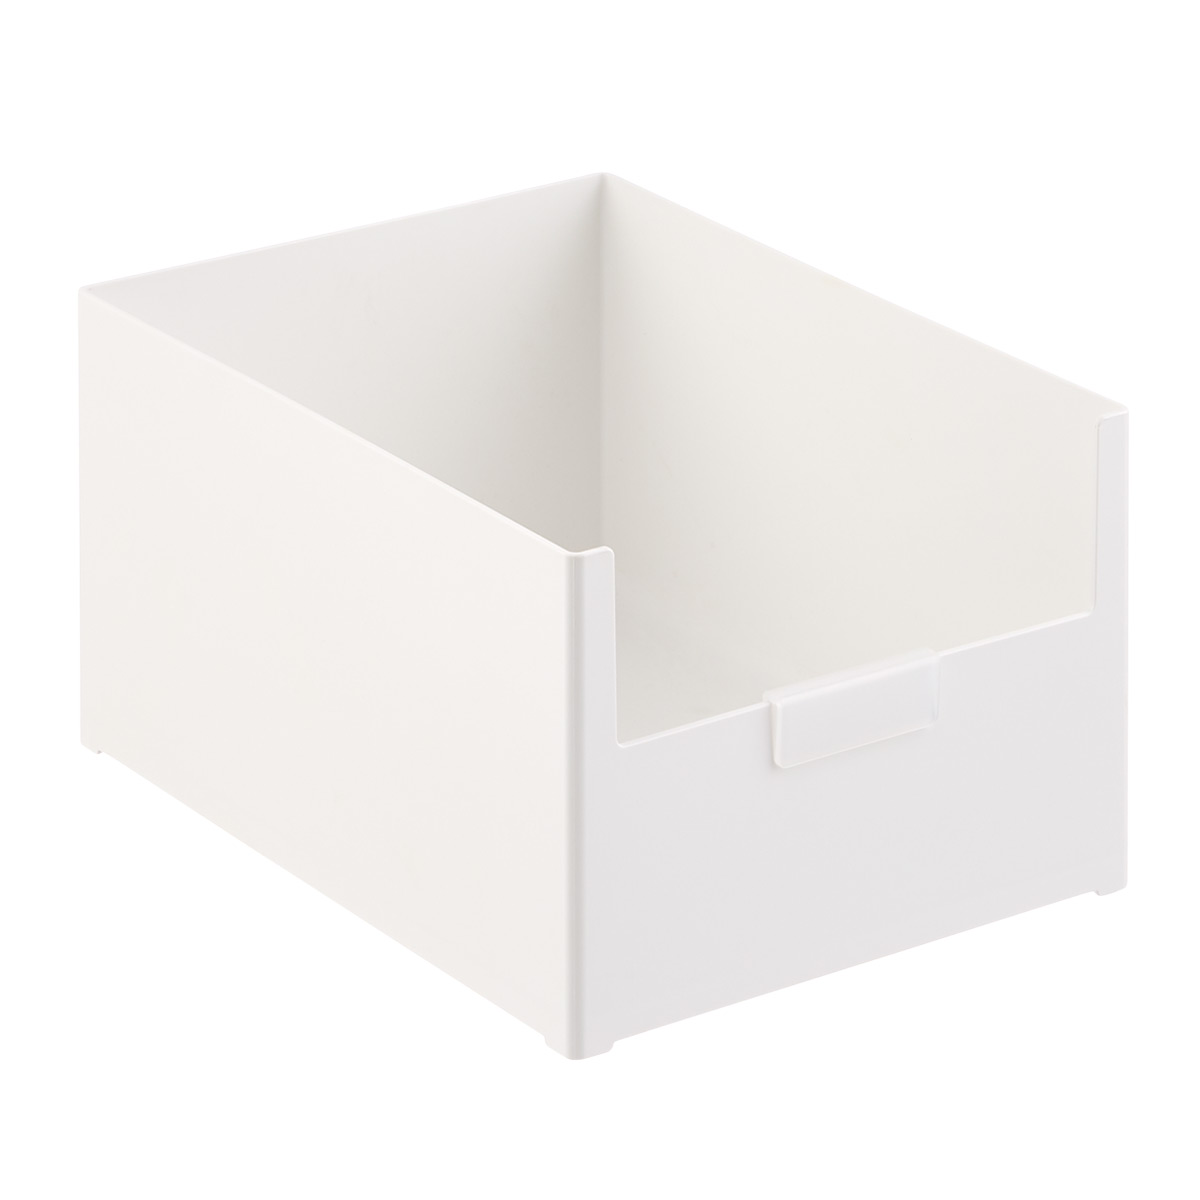 https://images.containerstore.com/catalogimages/408220/10083313_like_it_modular_organizer_d.jpg